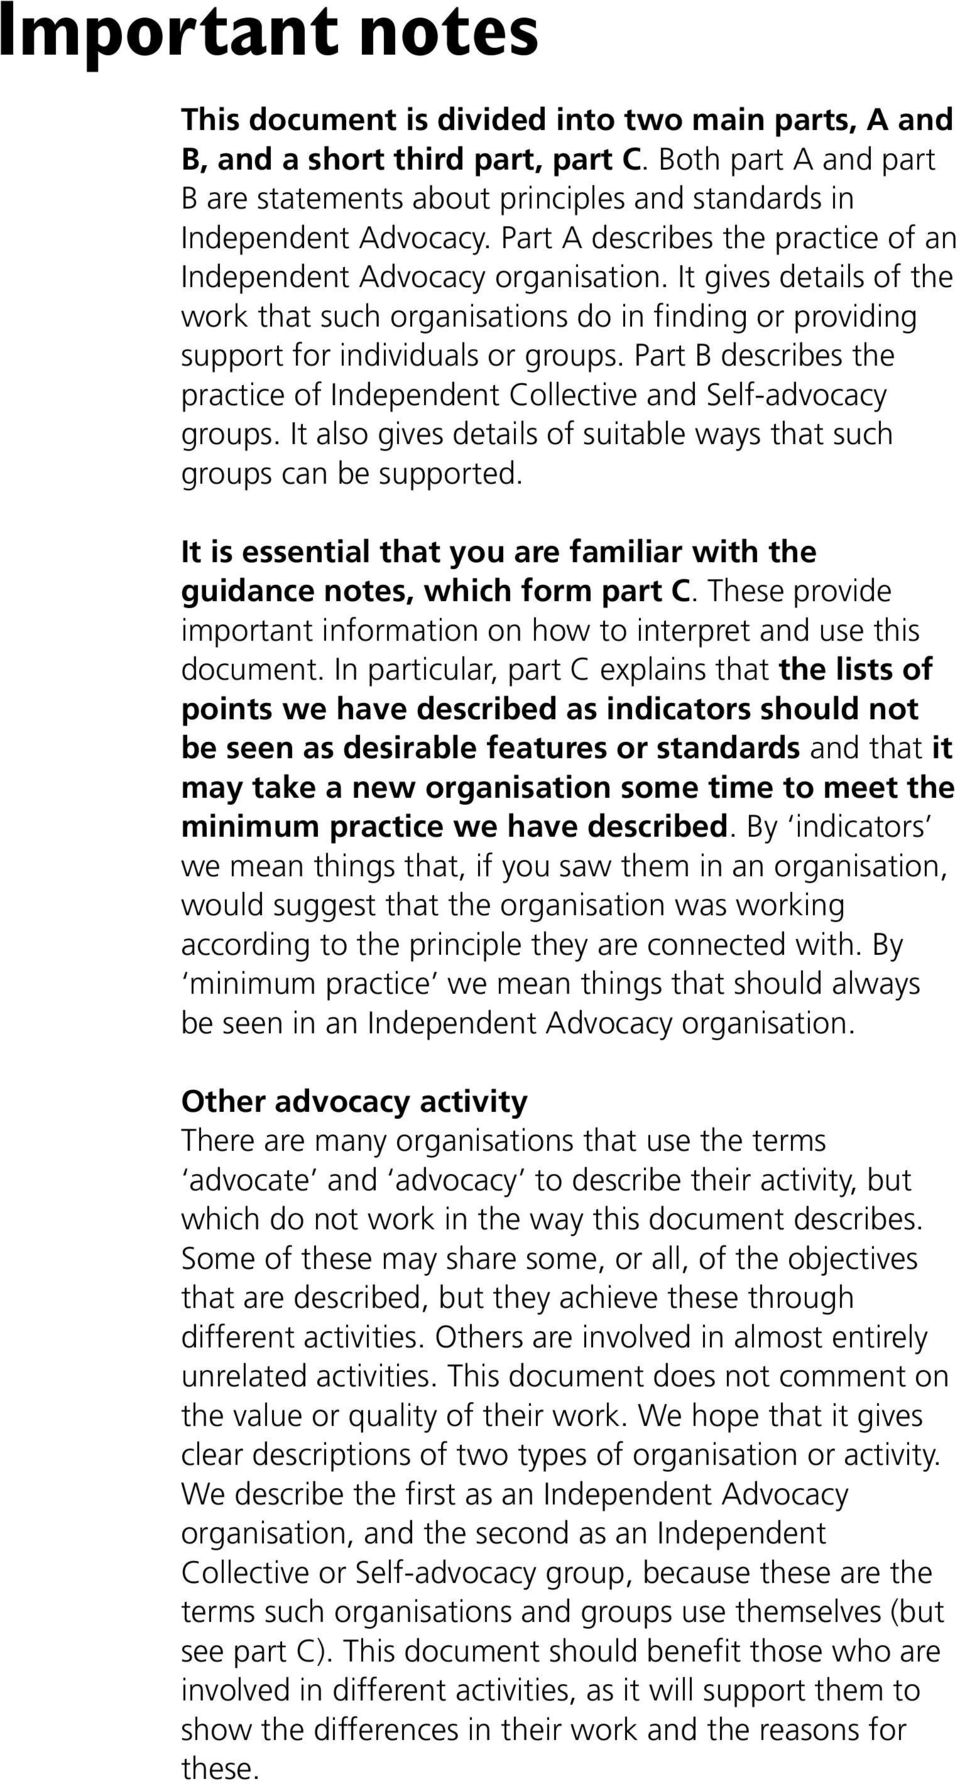 Part B describes the practice of Independent Collective and Self-advocacy groups. It also gives details of suitable ways that such groups can be supported.